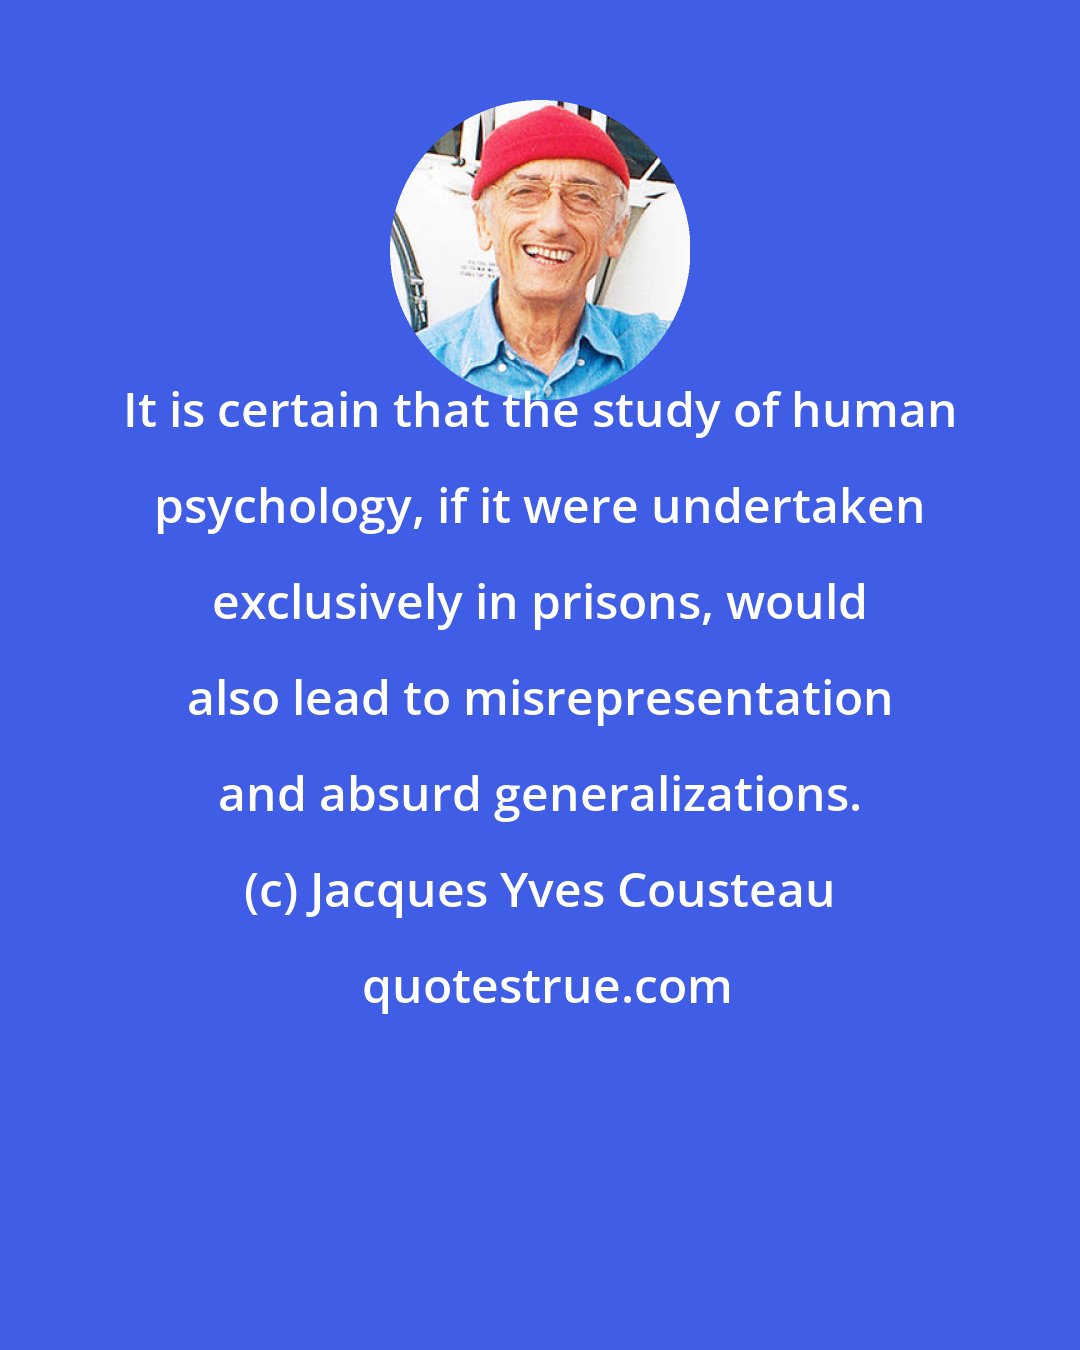 Jacques Yves Cousteau: It is certain that the study of human psychology, if it were undertaken exclusively in prisons, would also lead to misrepresentation and absurd generalizations.